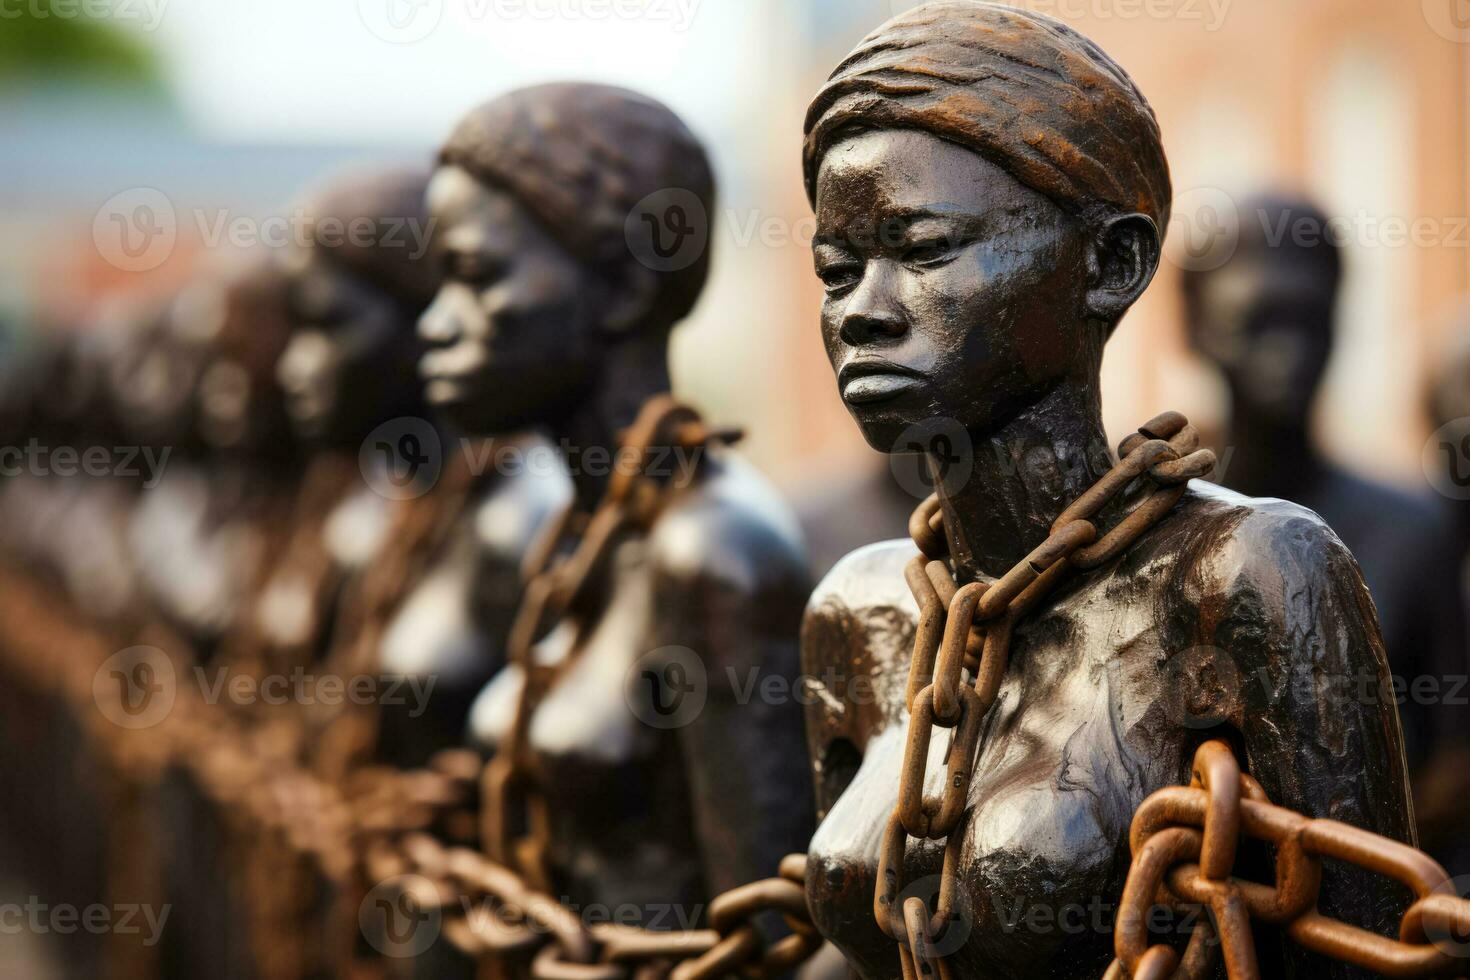 Remember the Slave Trade and its Abolition on International Day photo